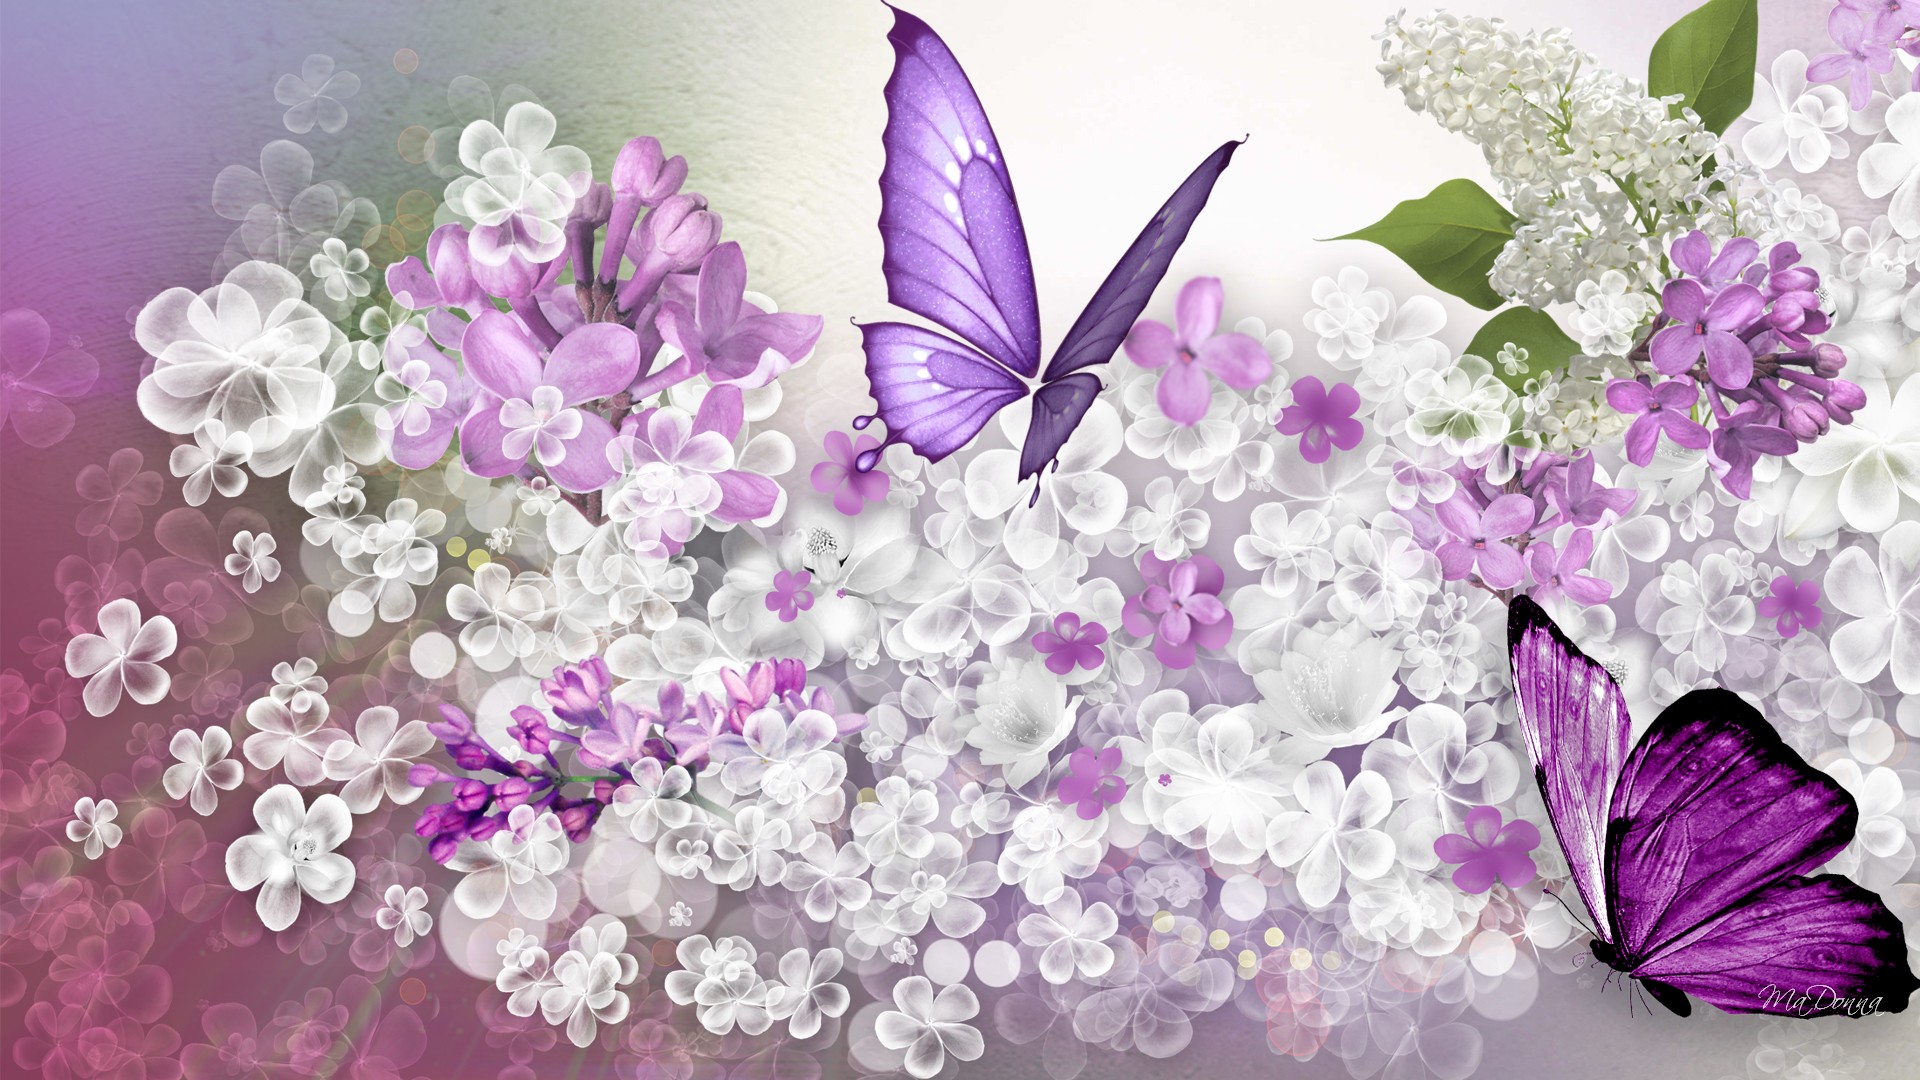 Lilac Flowers Windows 81 Theme and Pictures All for Windows 10 1920x1080